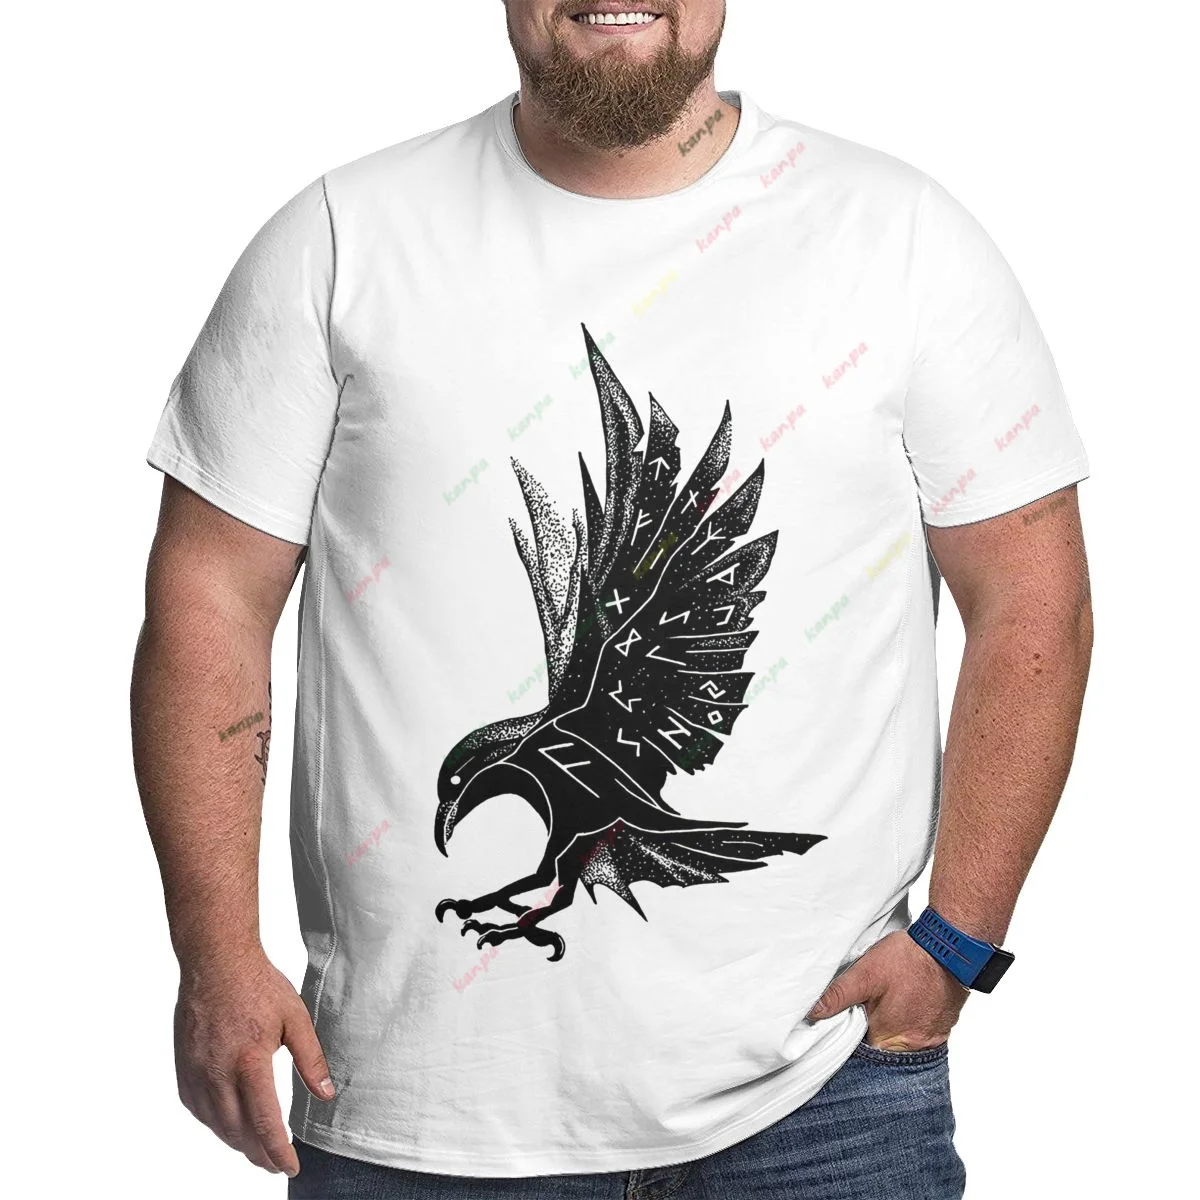 

Black crow Print T-Shirt for Men's Casual Crew Neck Short-Sleeve Fashion Summer T-Shirts Tops, Regular and Oversize Tees 6XL L